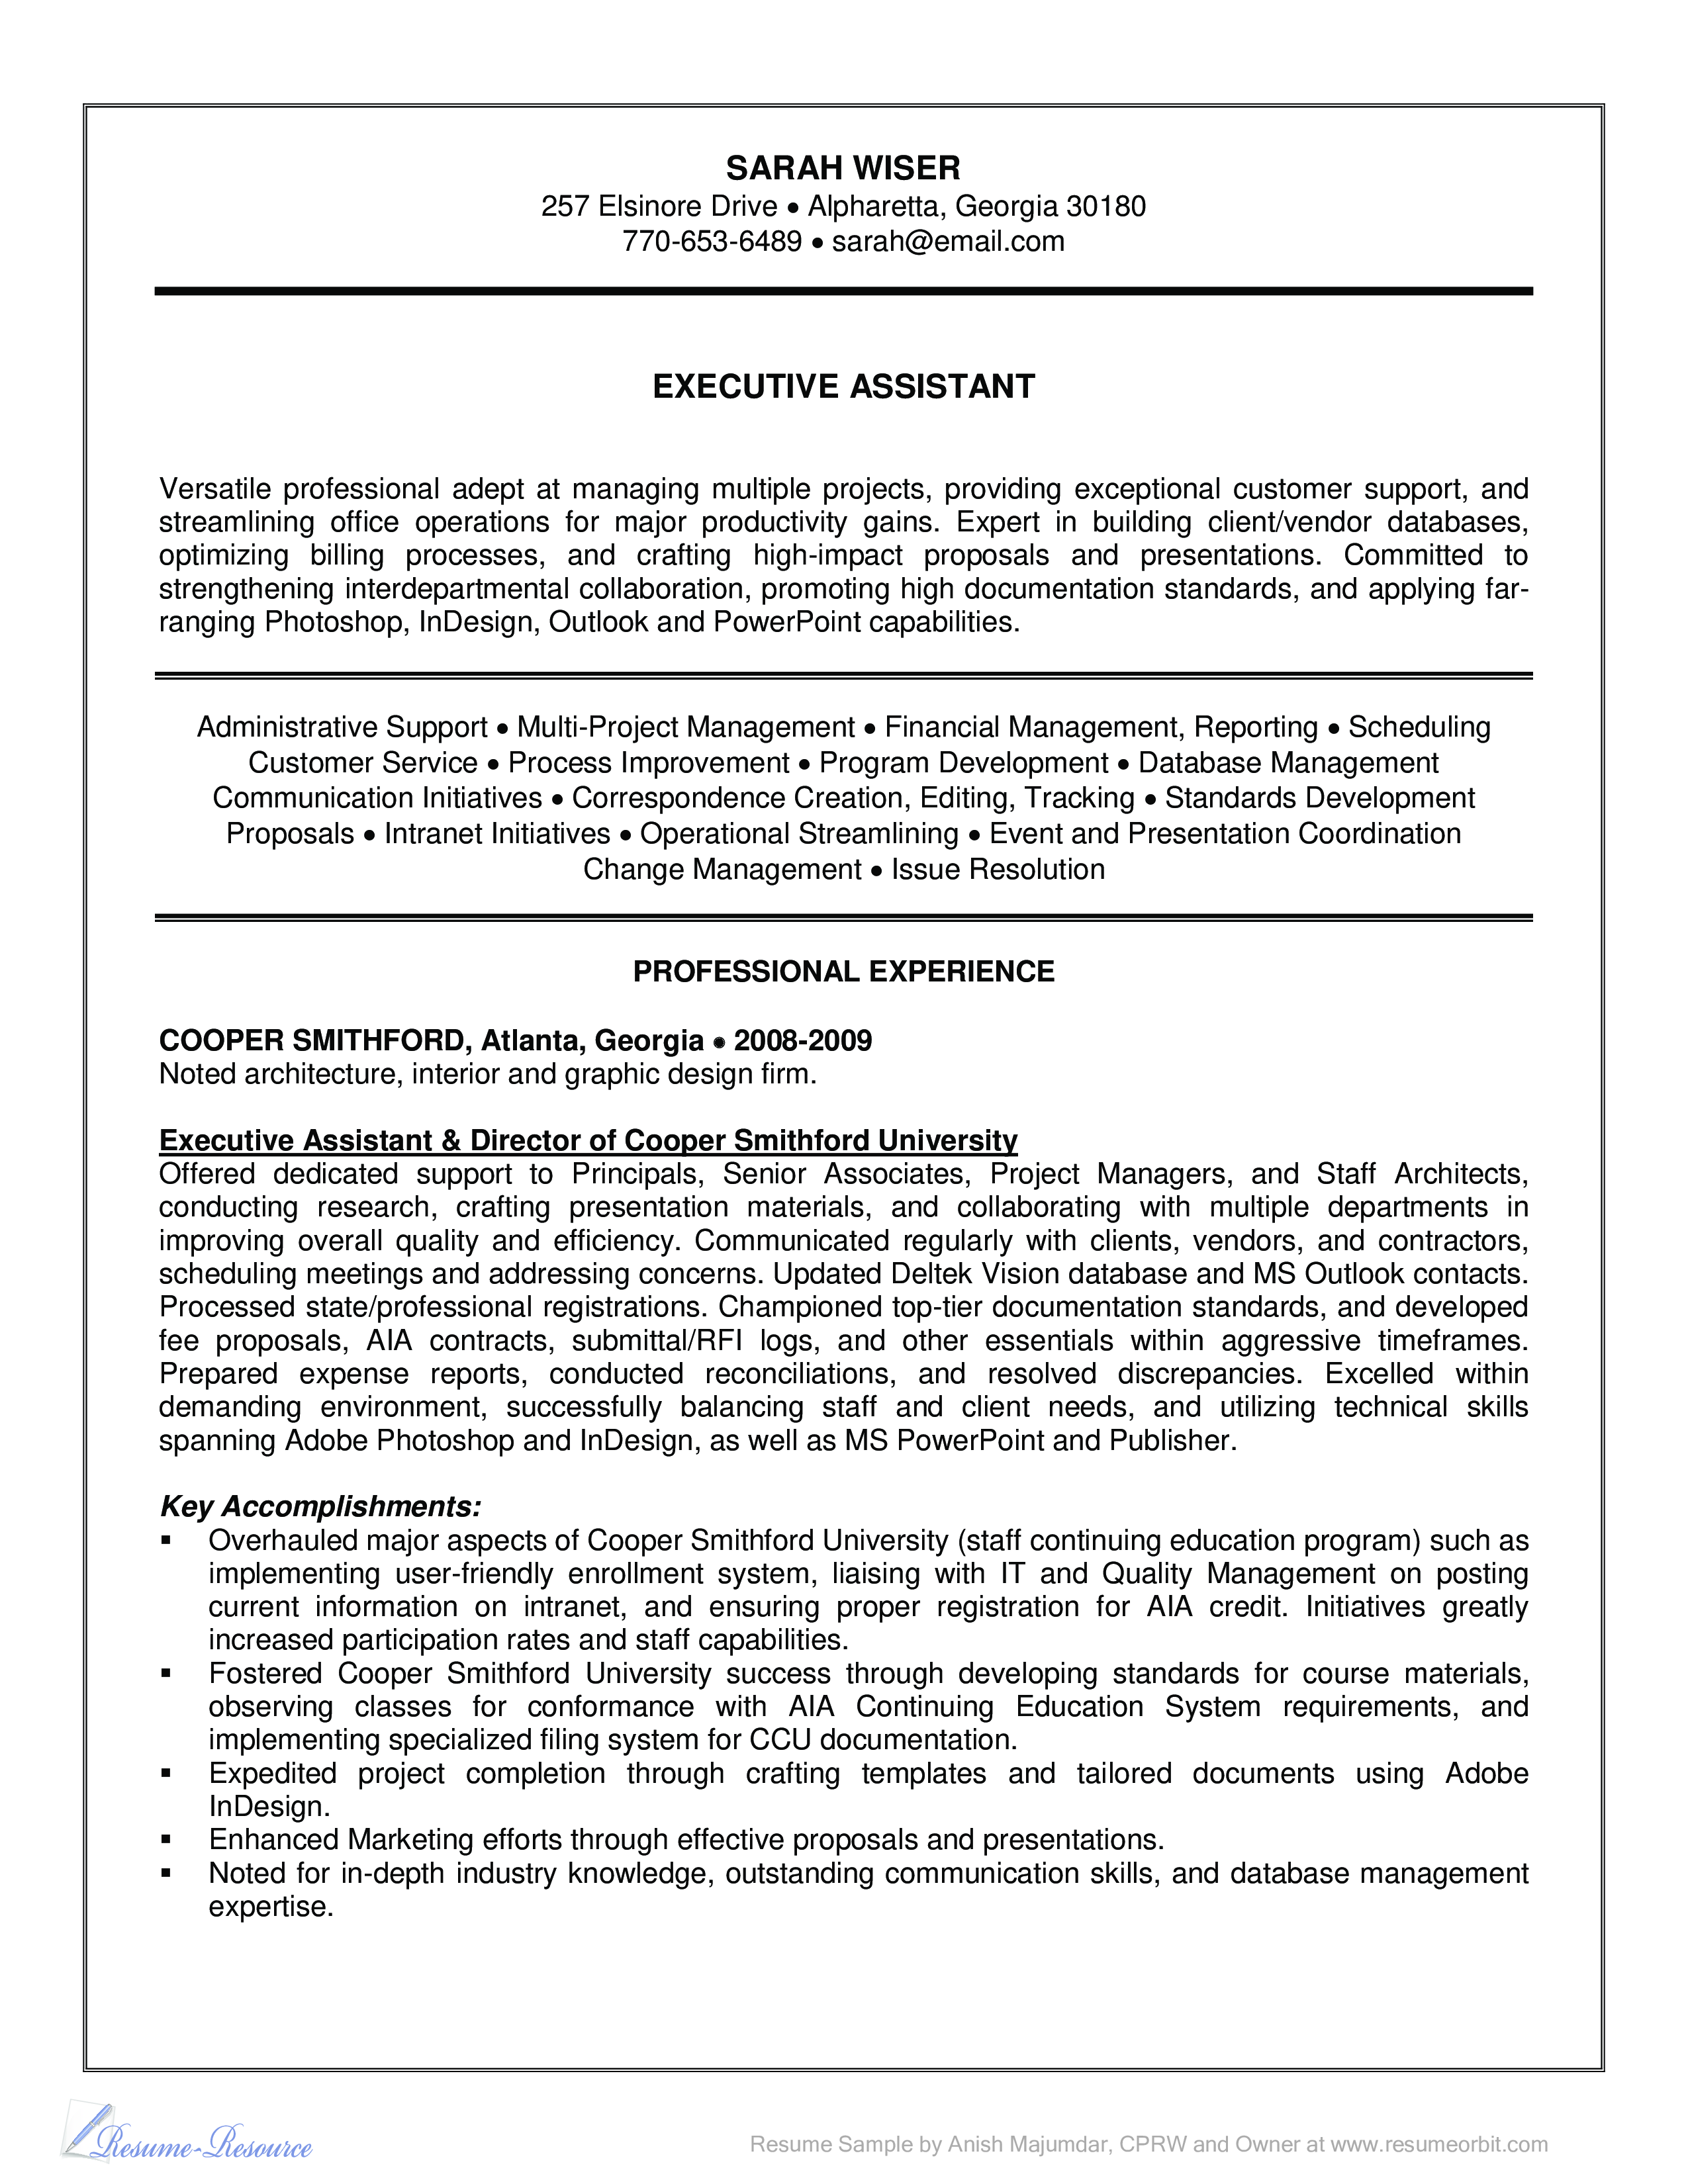 Executive Assistant Resume Example main image